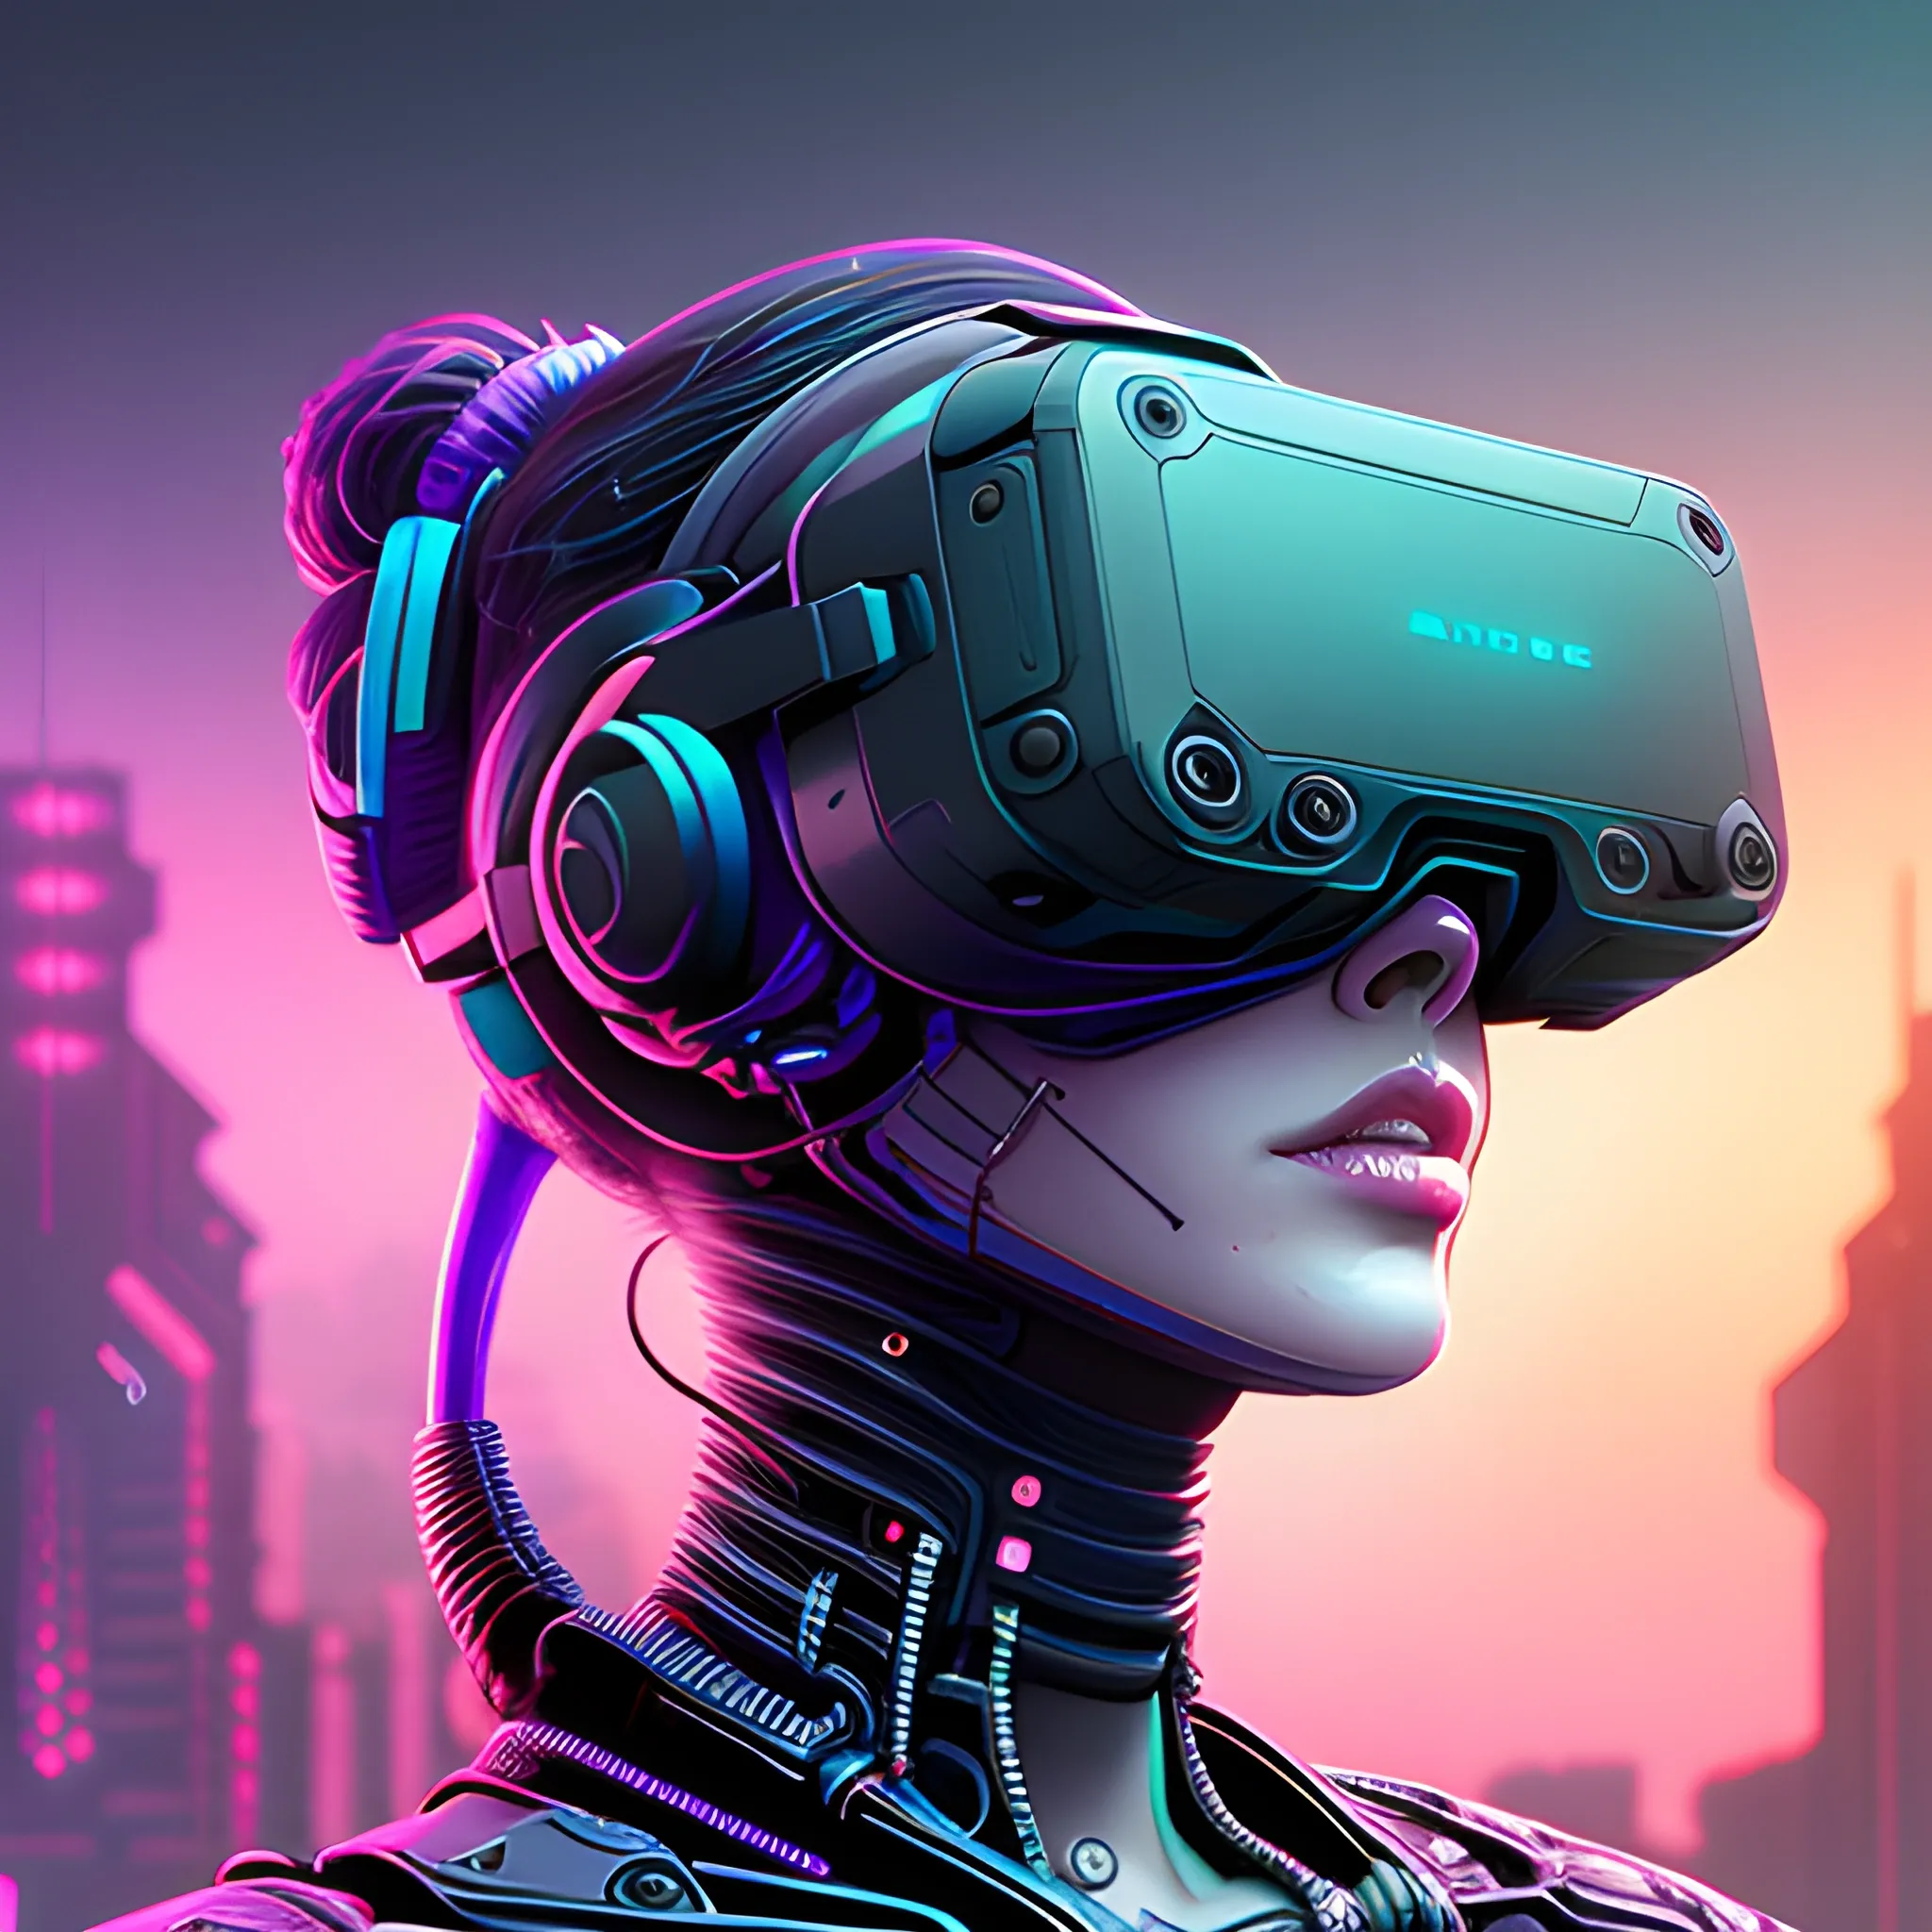 Silicon valley virtual reality 10 th anniversary, beautiful! woman with glasses, cyberpunk art by android jones, cyberpunk art by beeple, synthwave, darksynth, quantum tracerwave, wireframes